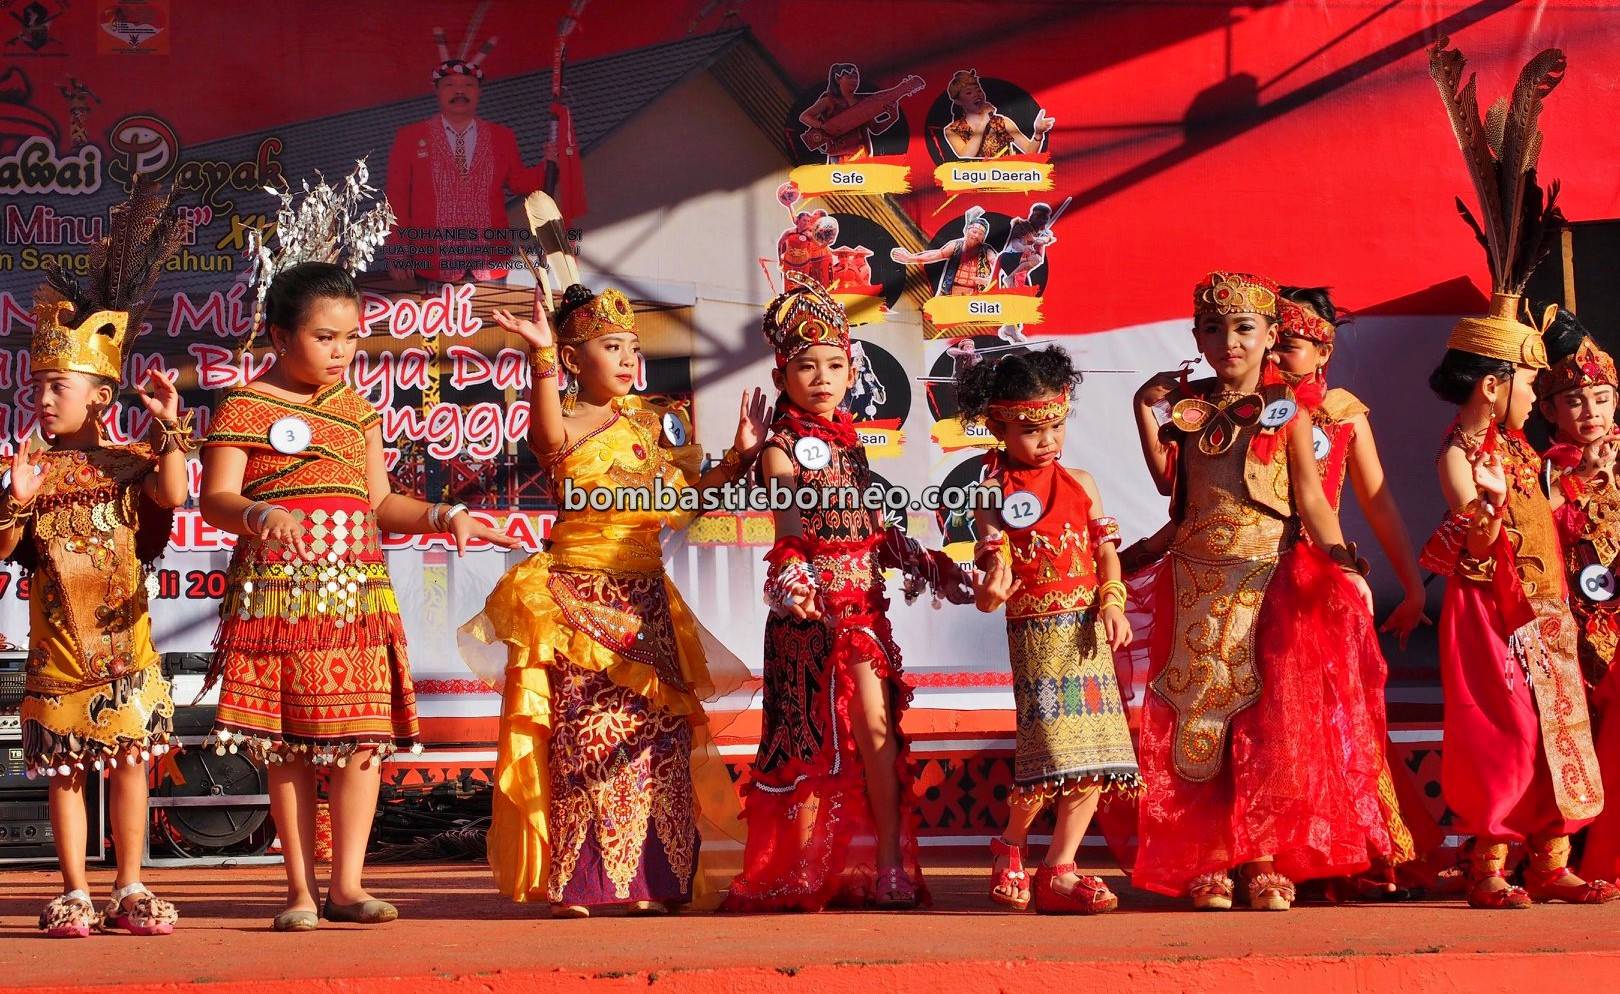 Harvest Festival, authentic, traditional, culture, backpackers, Ethnic, indigenous, native, tribe, tourist attraction, travel guide, Borneo, 婆罗洲游踪, 印尼原住民丰收节, 西加里曼丹土著文化,